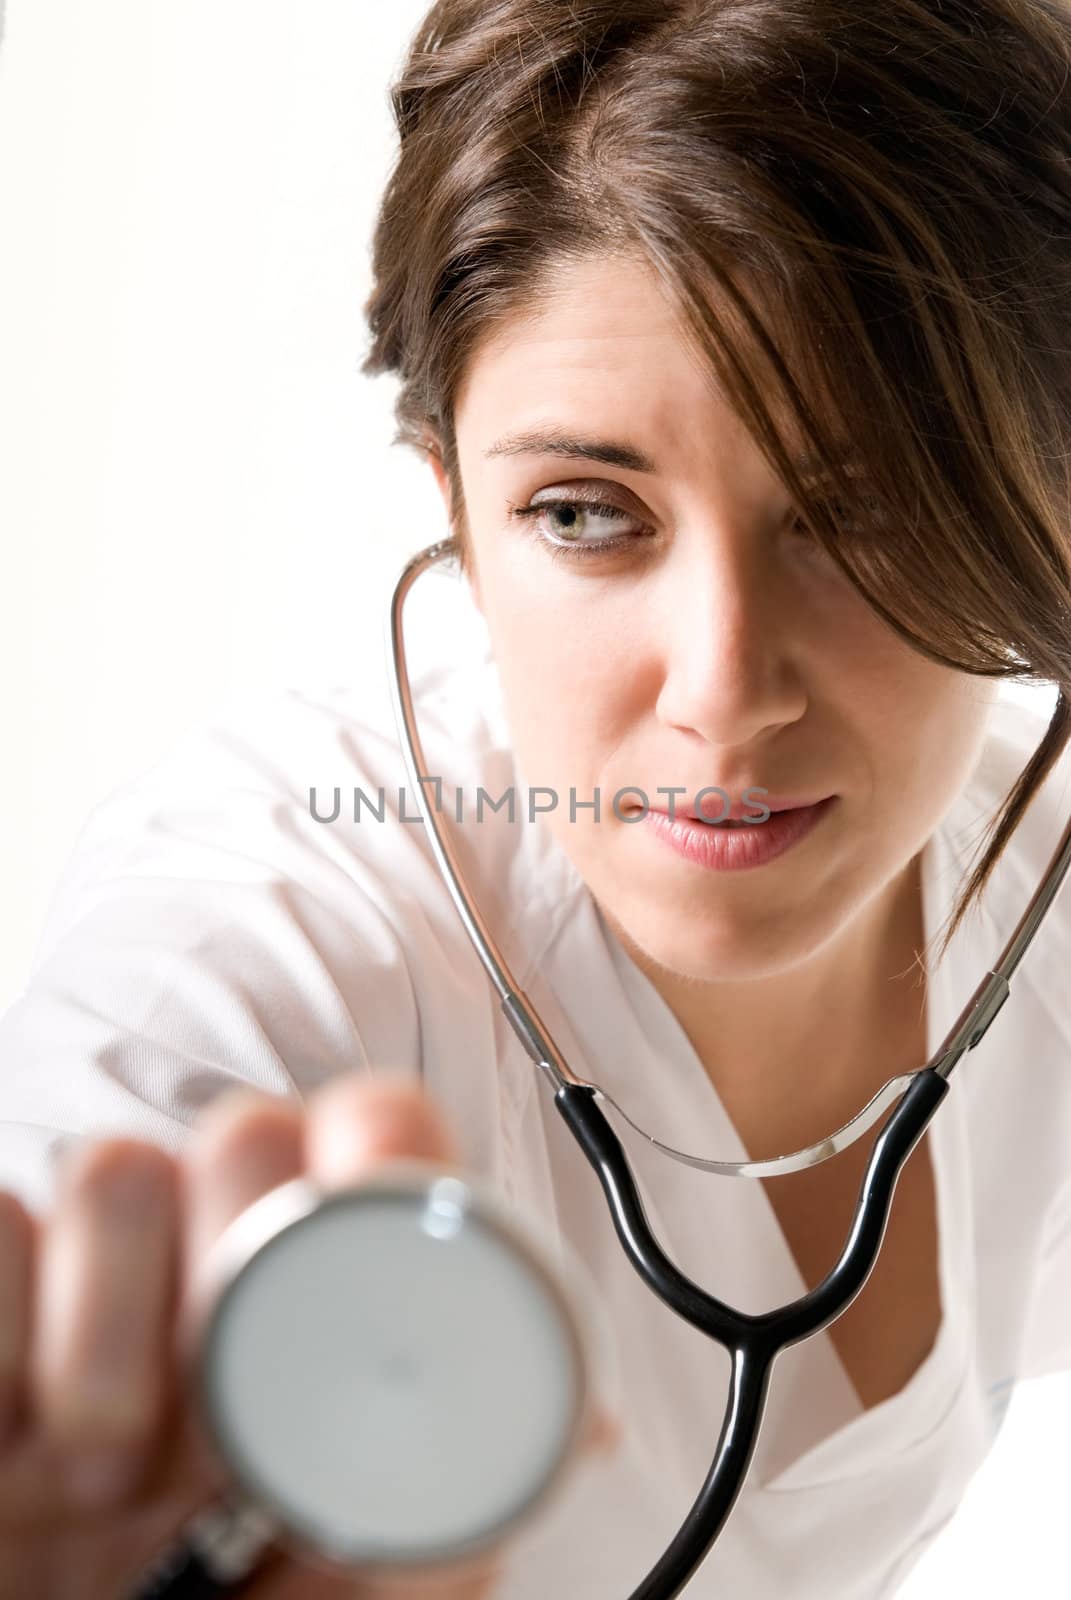 Young woman doctor with stethoscope on white background. Focused on face.